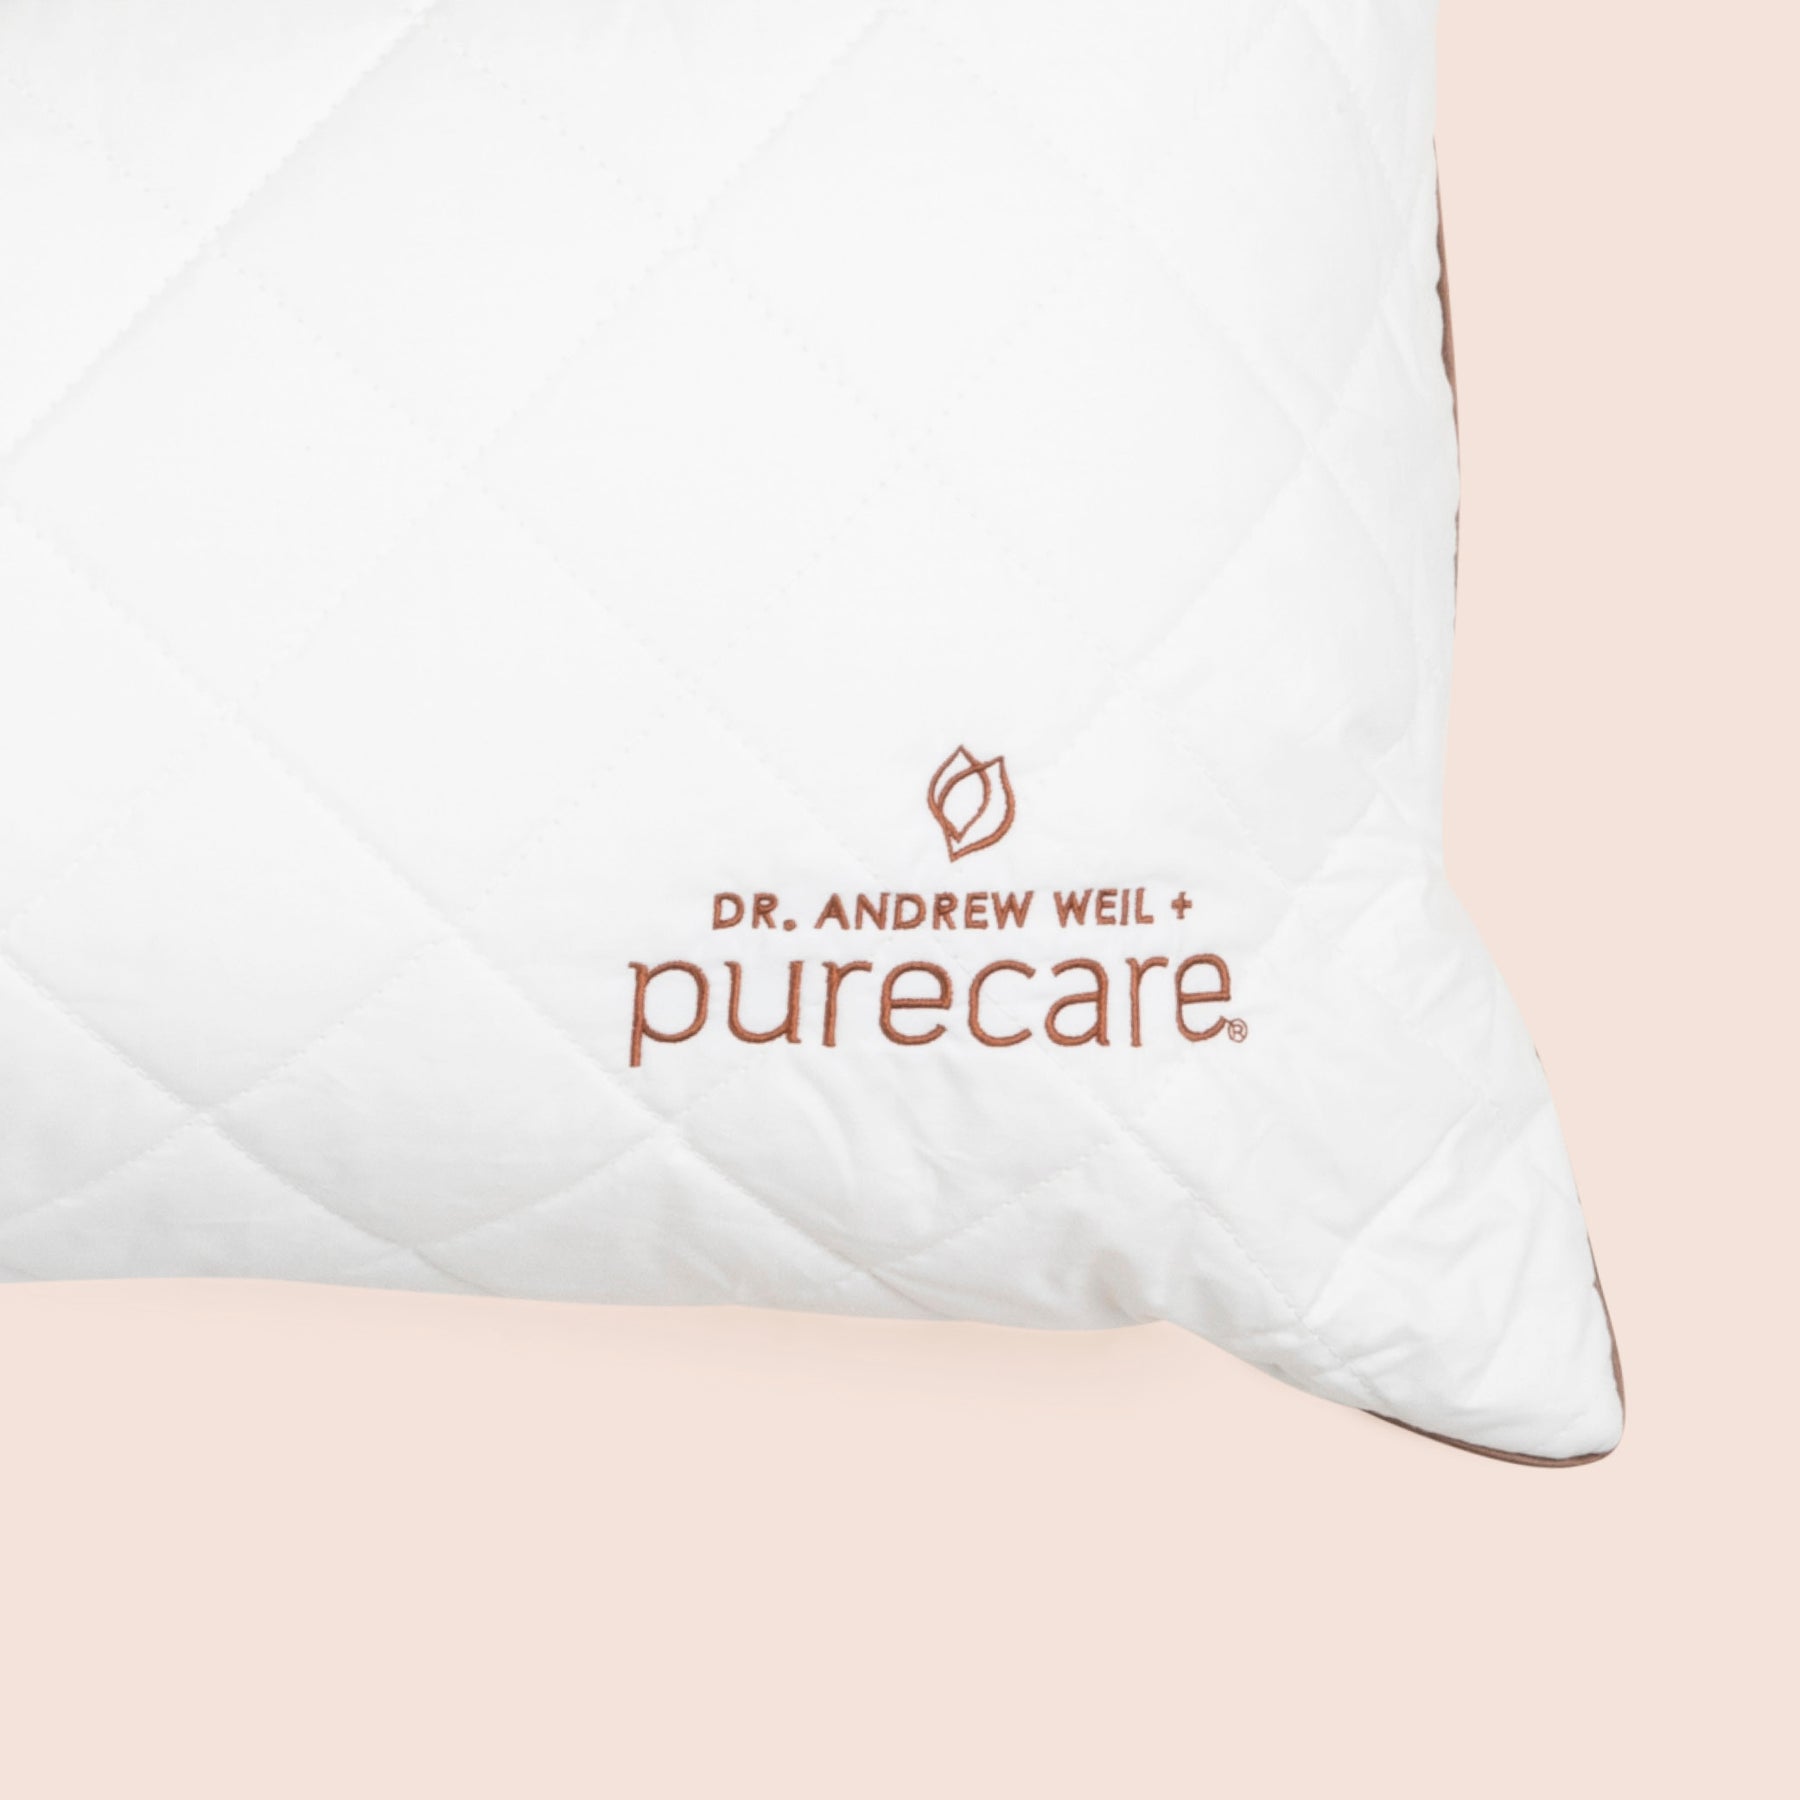 Close-up image of the Dr. Andrew Weil + Purecare logo on bottom right corner of pillow